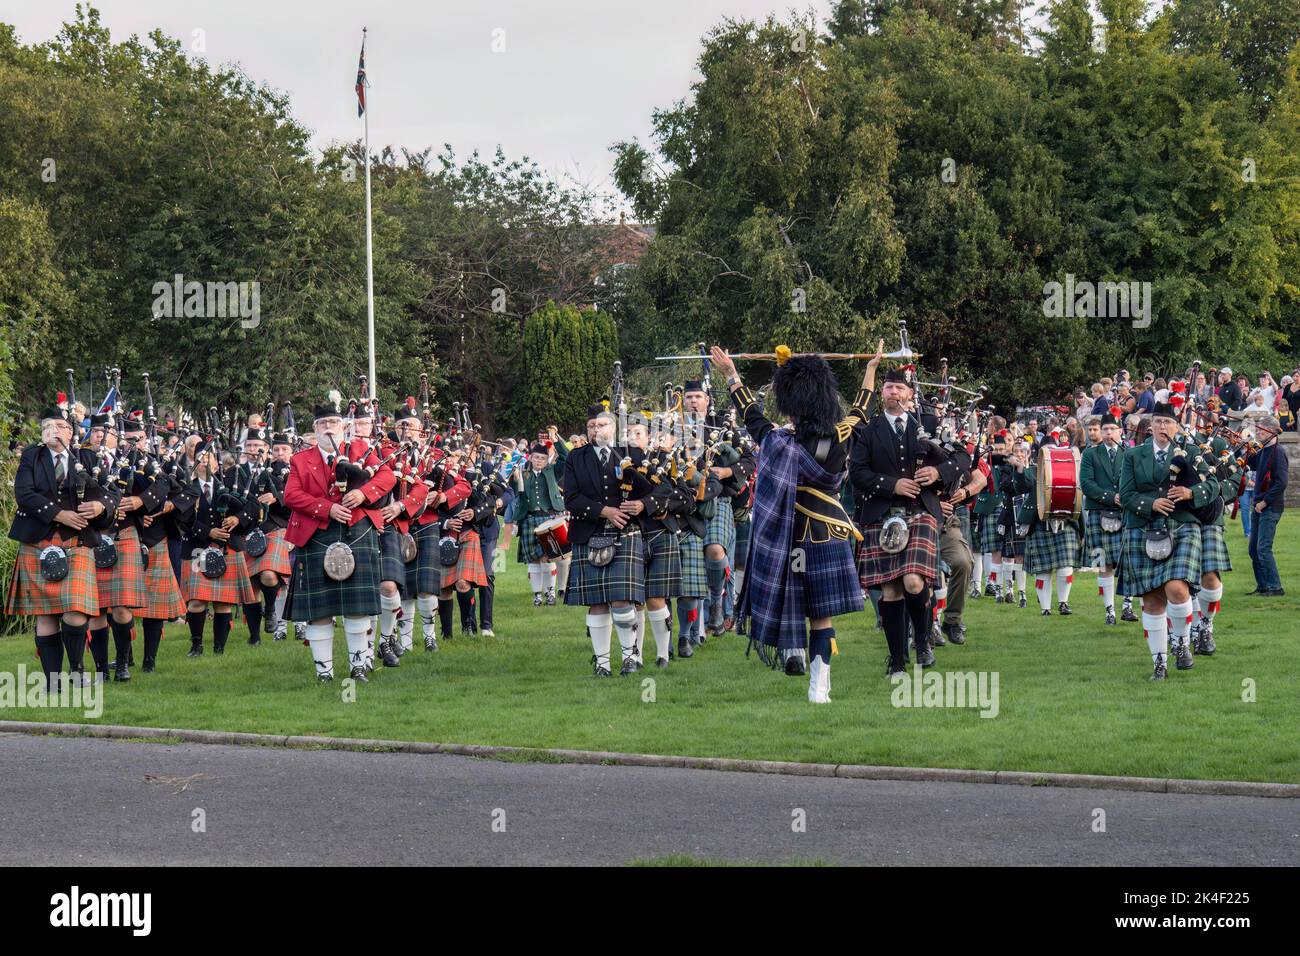 BIDEFORD, DEVON, ENGLAND - SEPTEMBER 10 2022: Many pipers piping, to commemorate the death of Queen Elizabeth II, in Bideford Victoria Park. Stock Photo